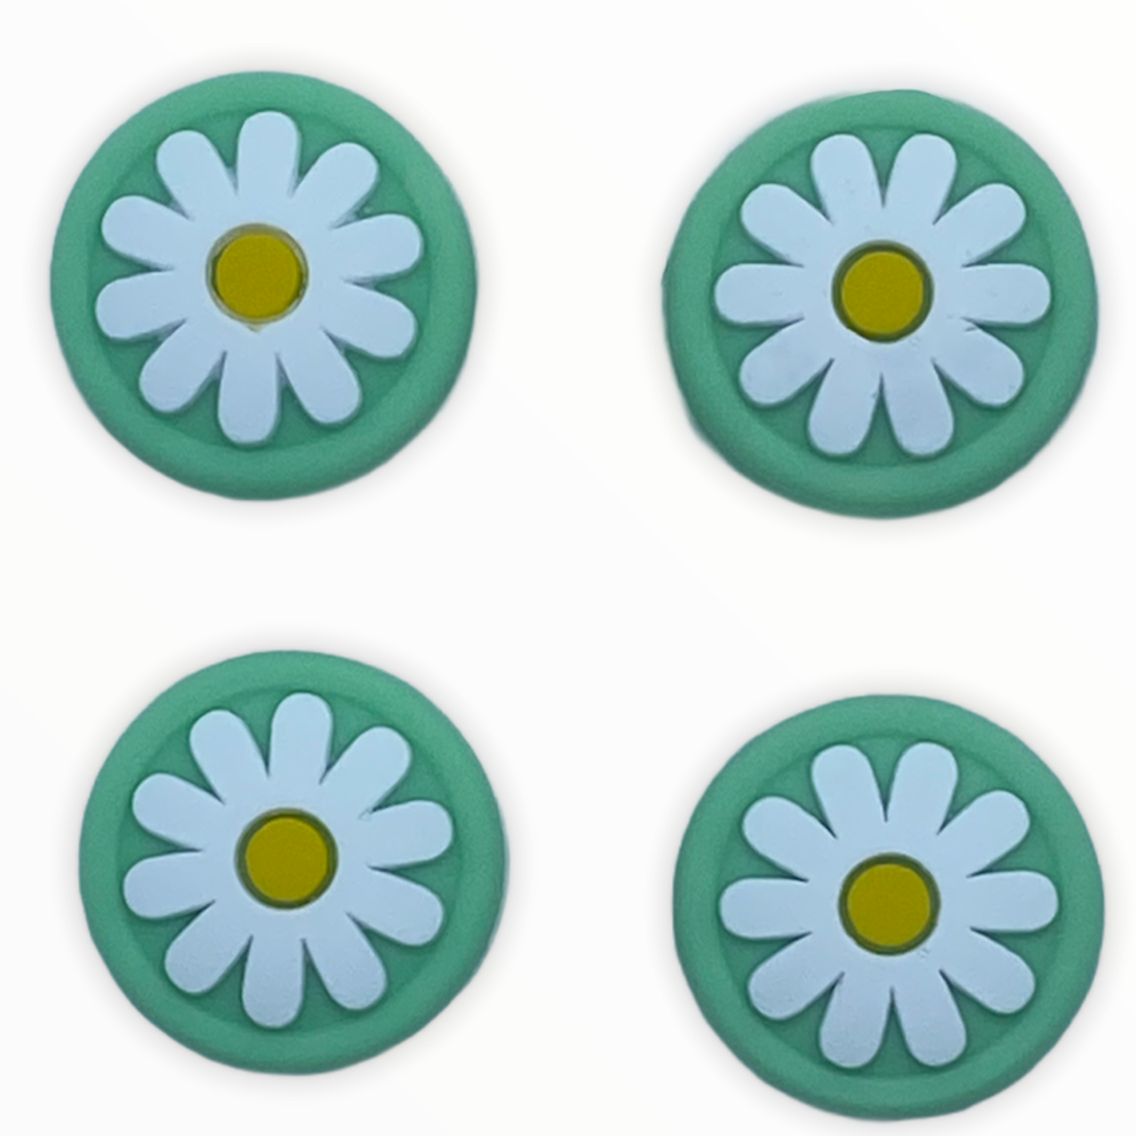 JenDore Green 4Pcs Flower #2 Silicone Thumb Grip Caps for Nintendo Switch